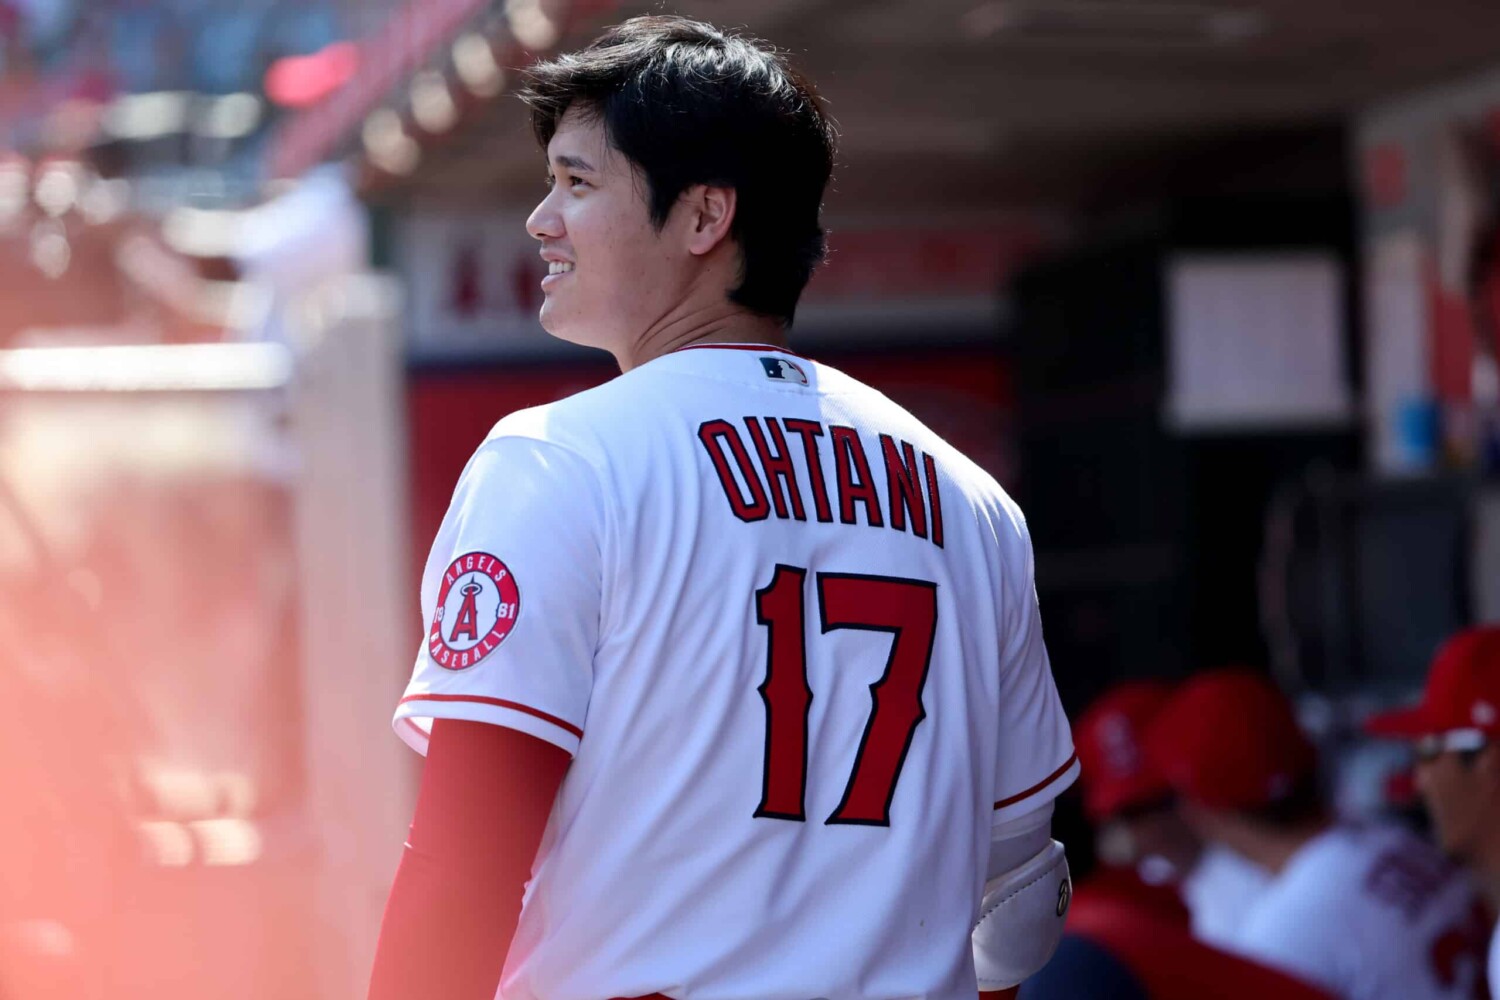 Endorsement Magnet Shohei Ohtani Signs with New Balance